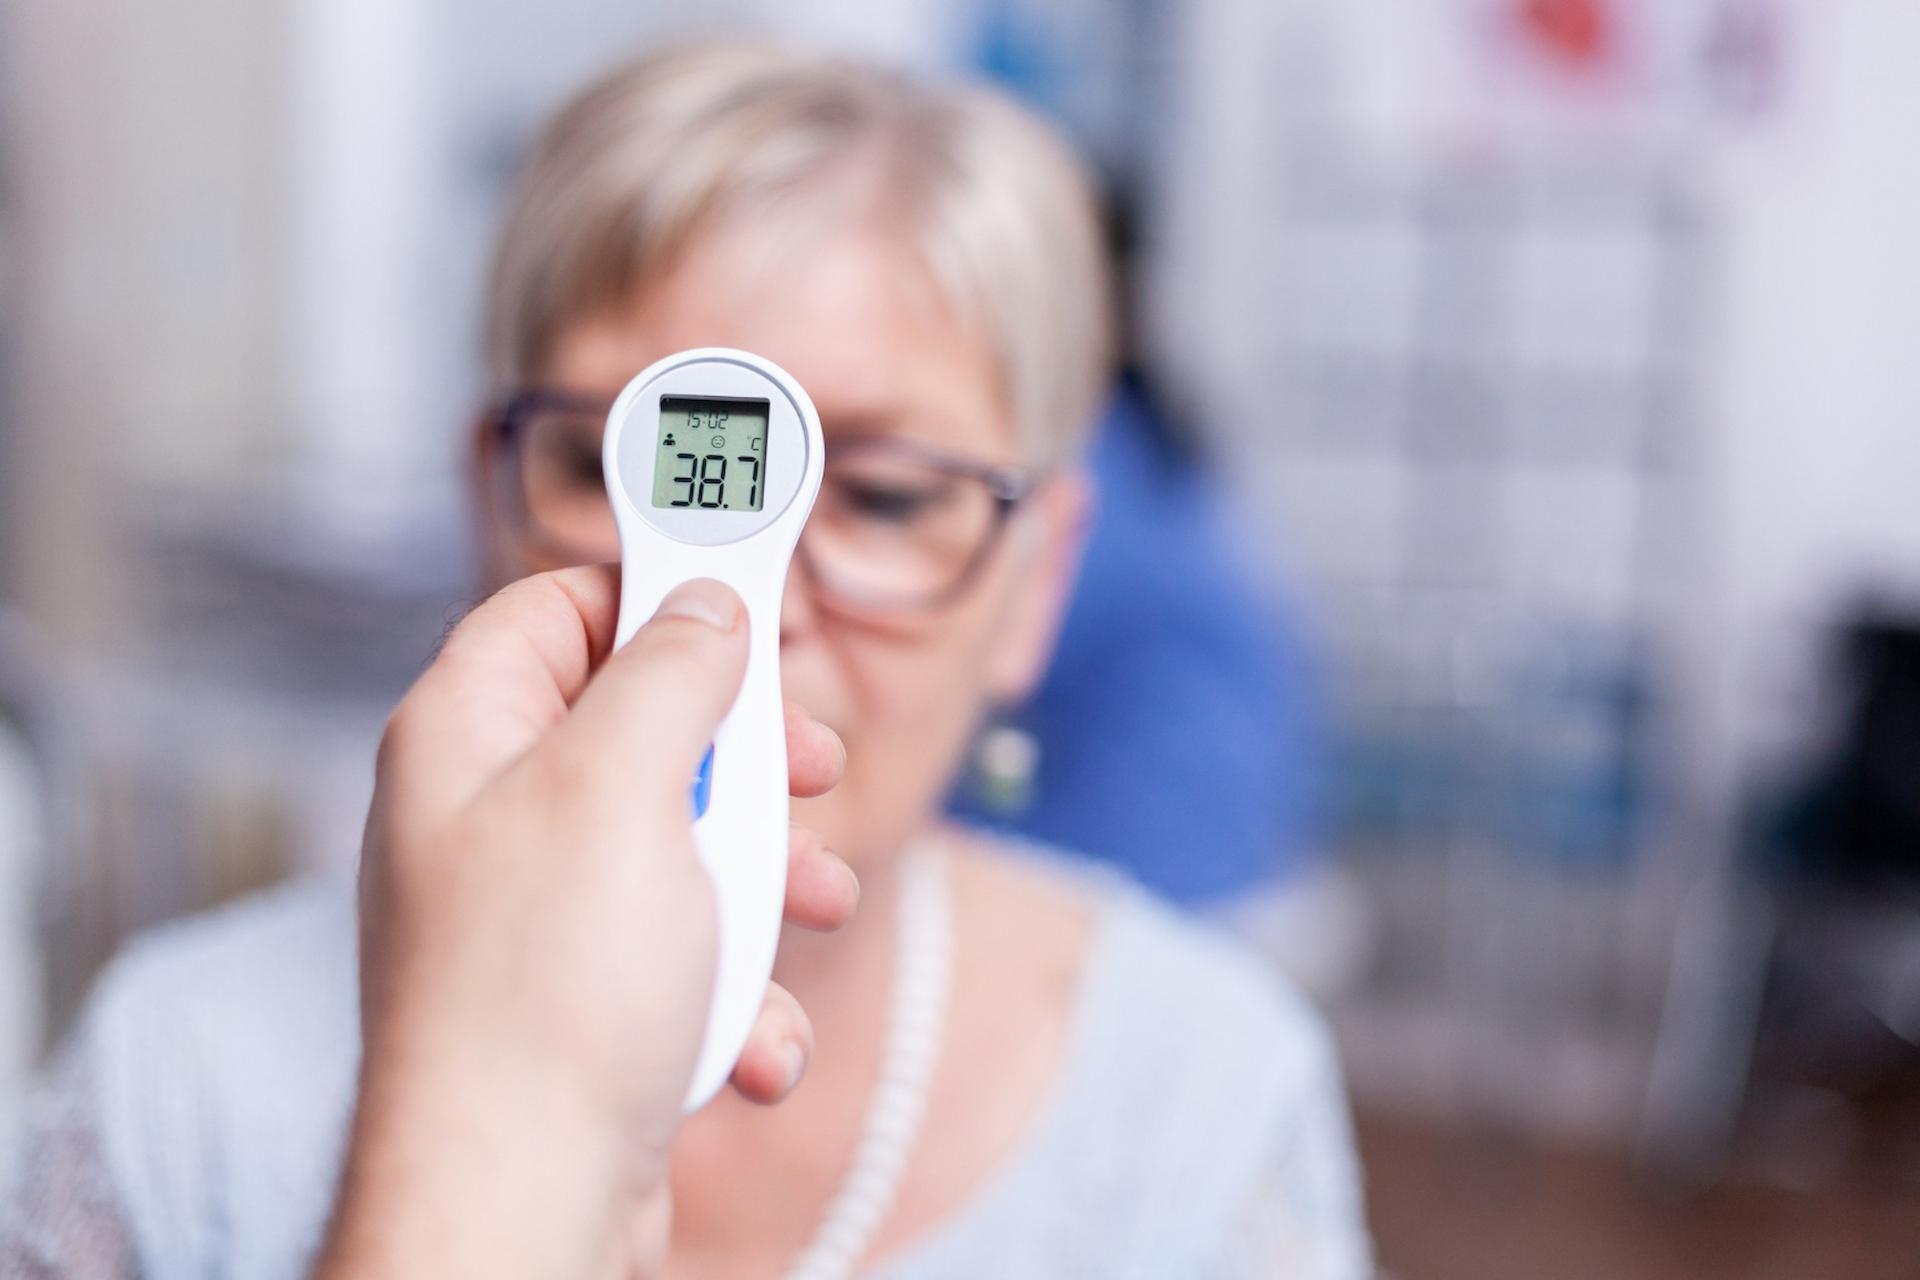 Important Things While Using Thermometers To Check Body Temperature